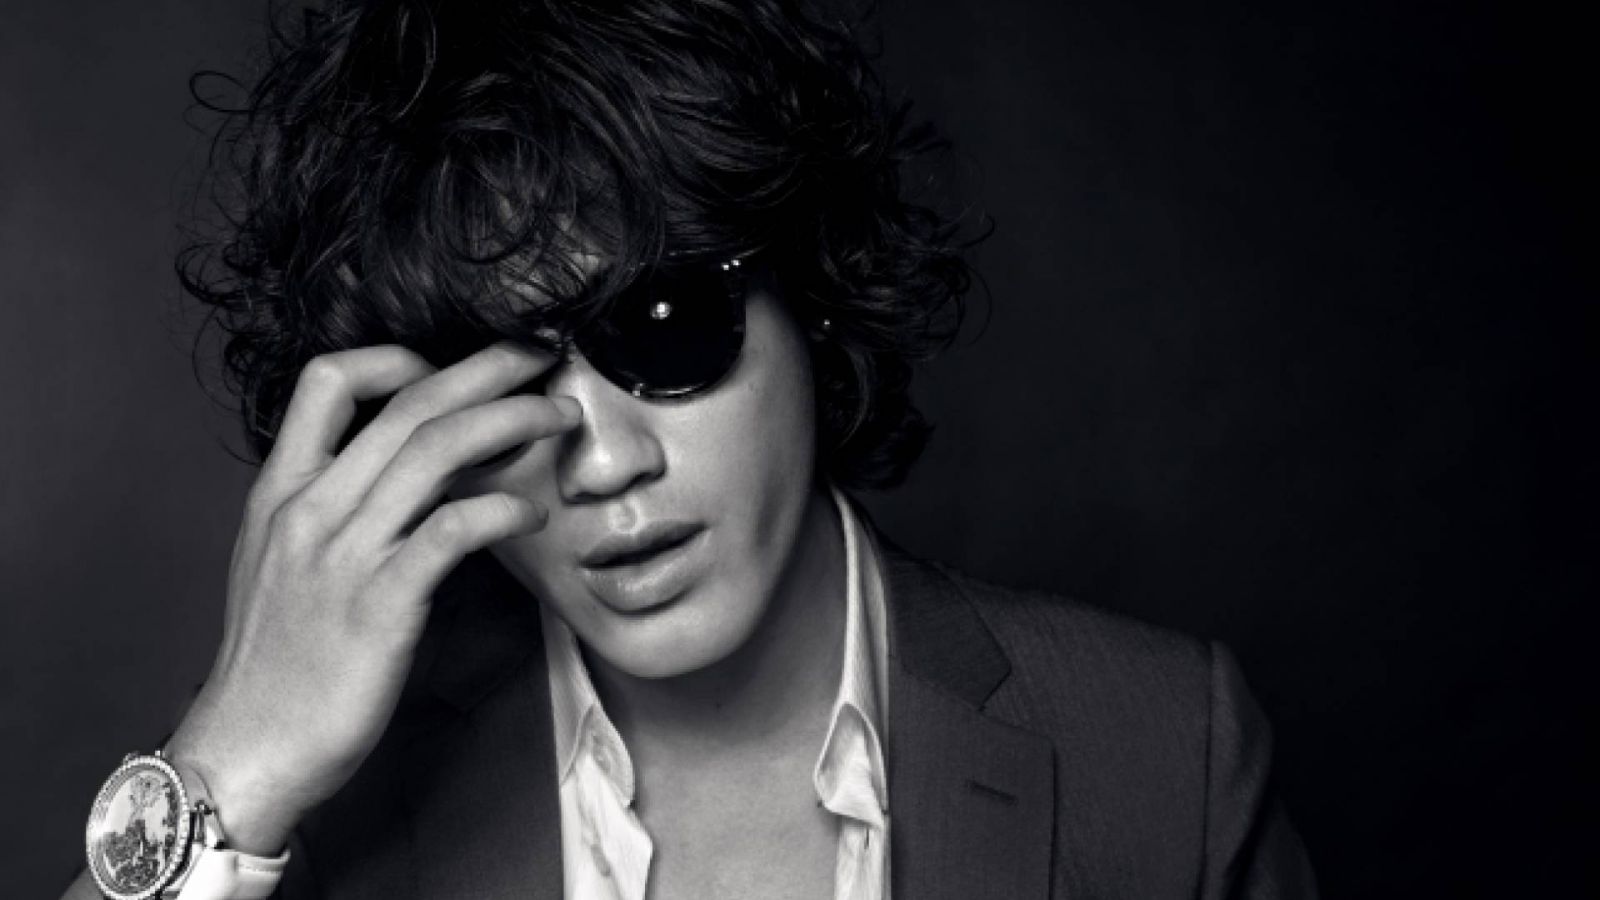 Interview with Jin Akanishi © J & A